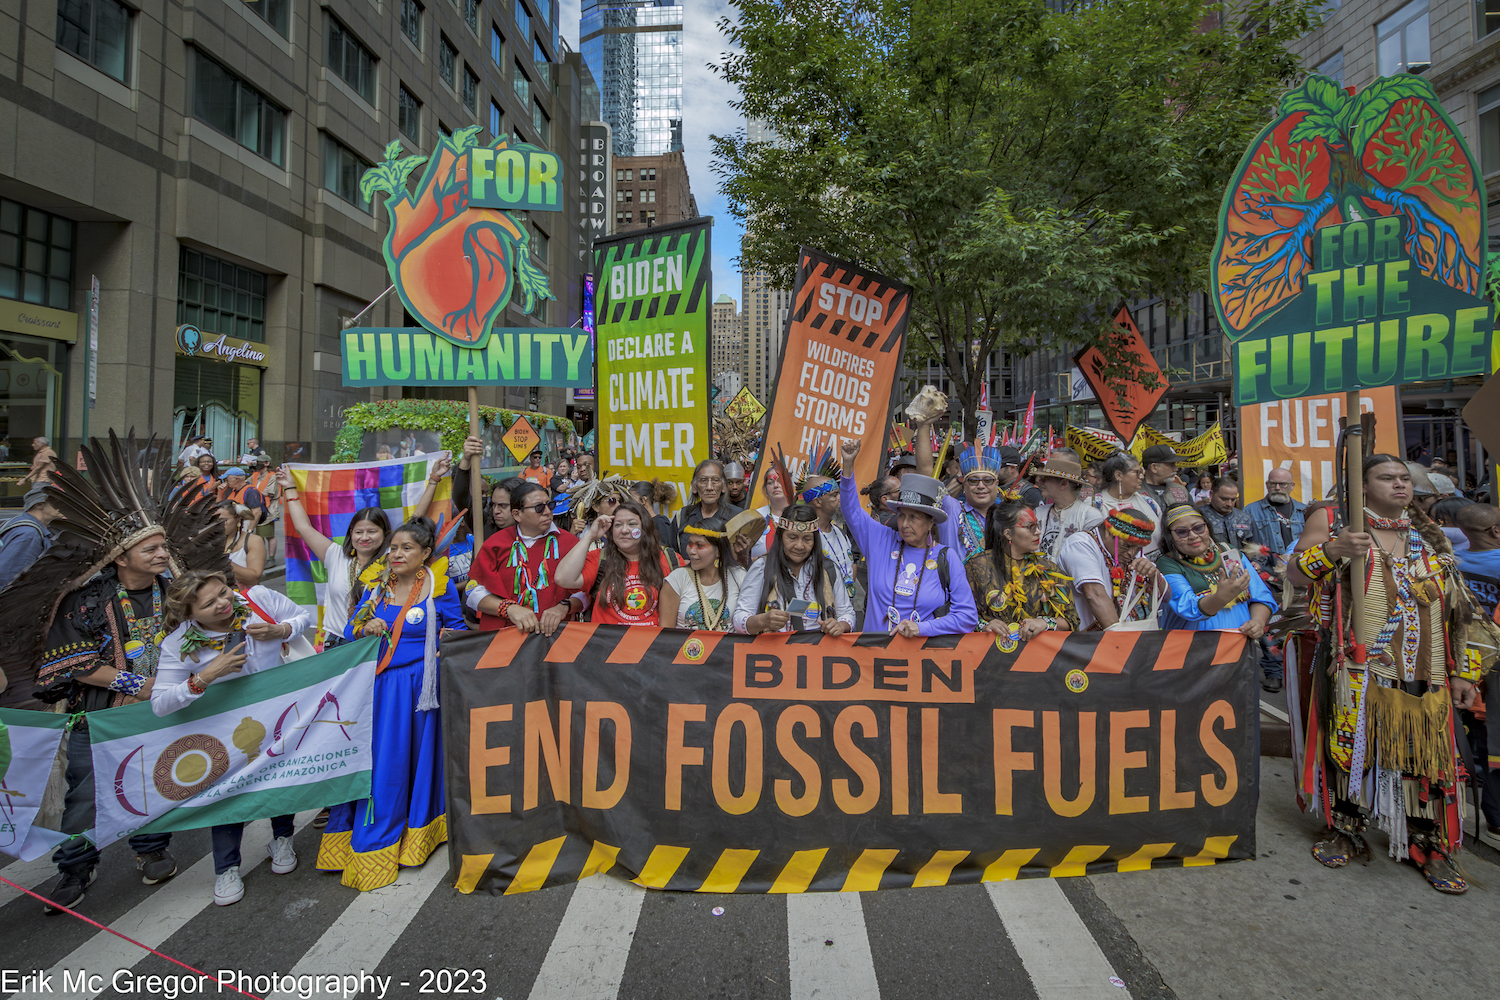 Thousands March Worldwide to End Fossil Fuels, as Biden Continues to Shirk His Responsibility to Address Climate Change